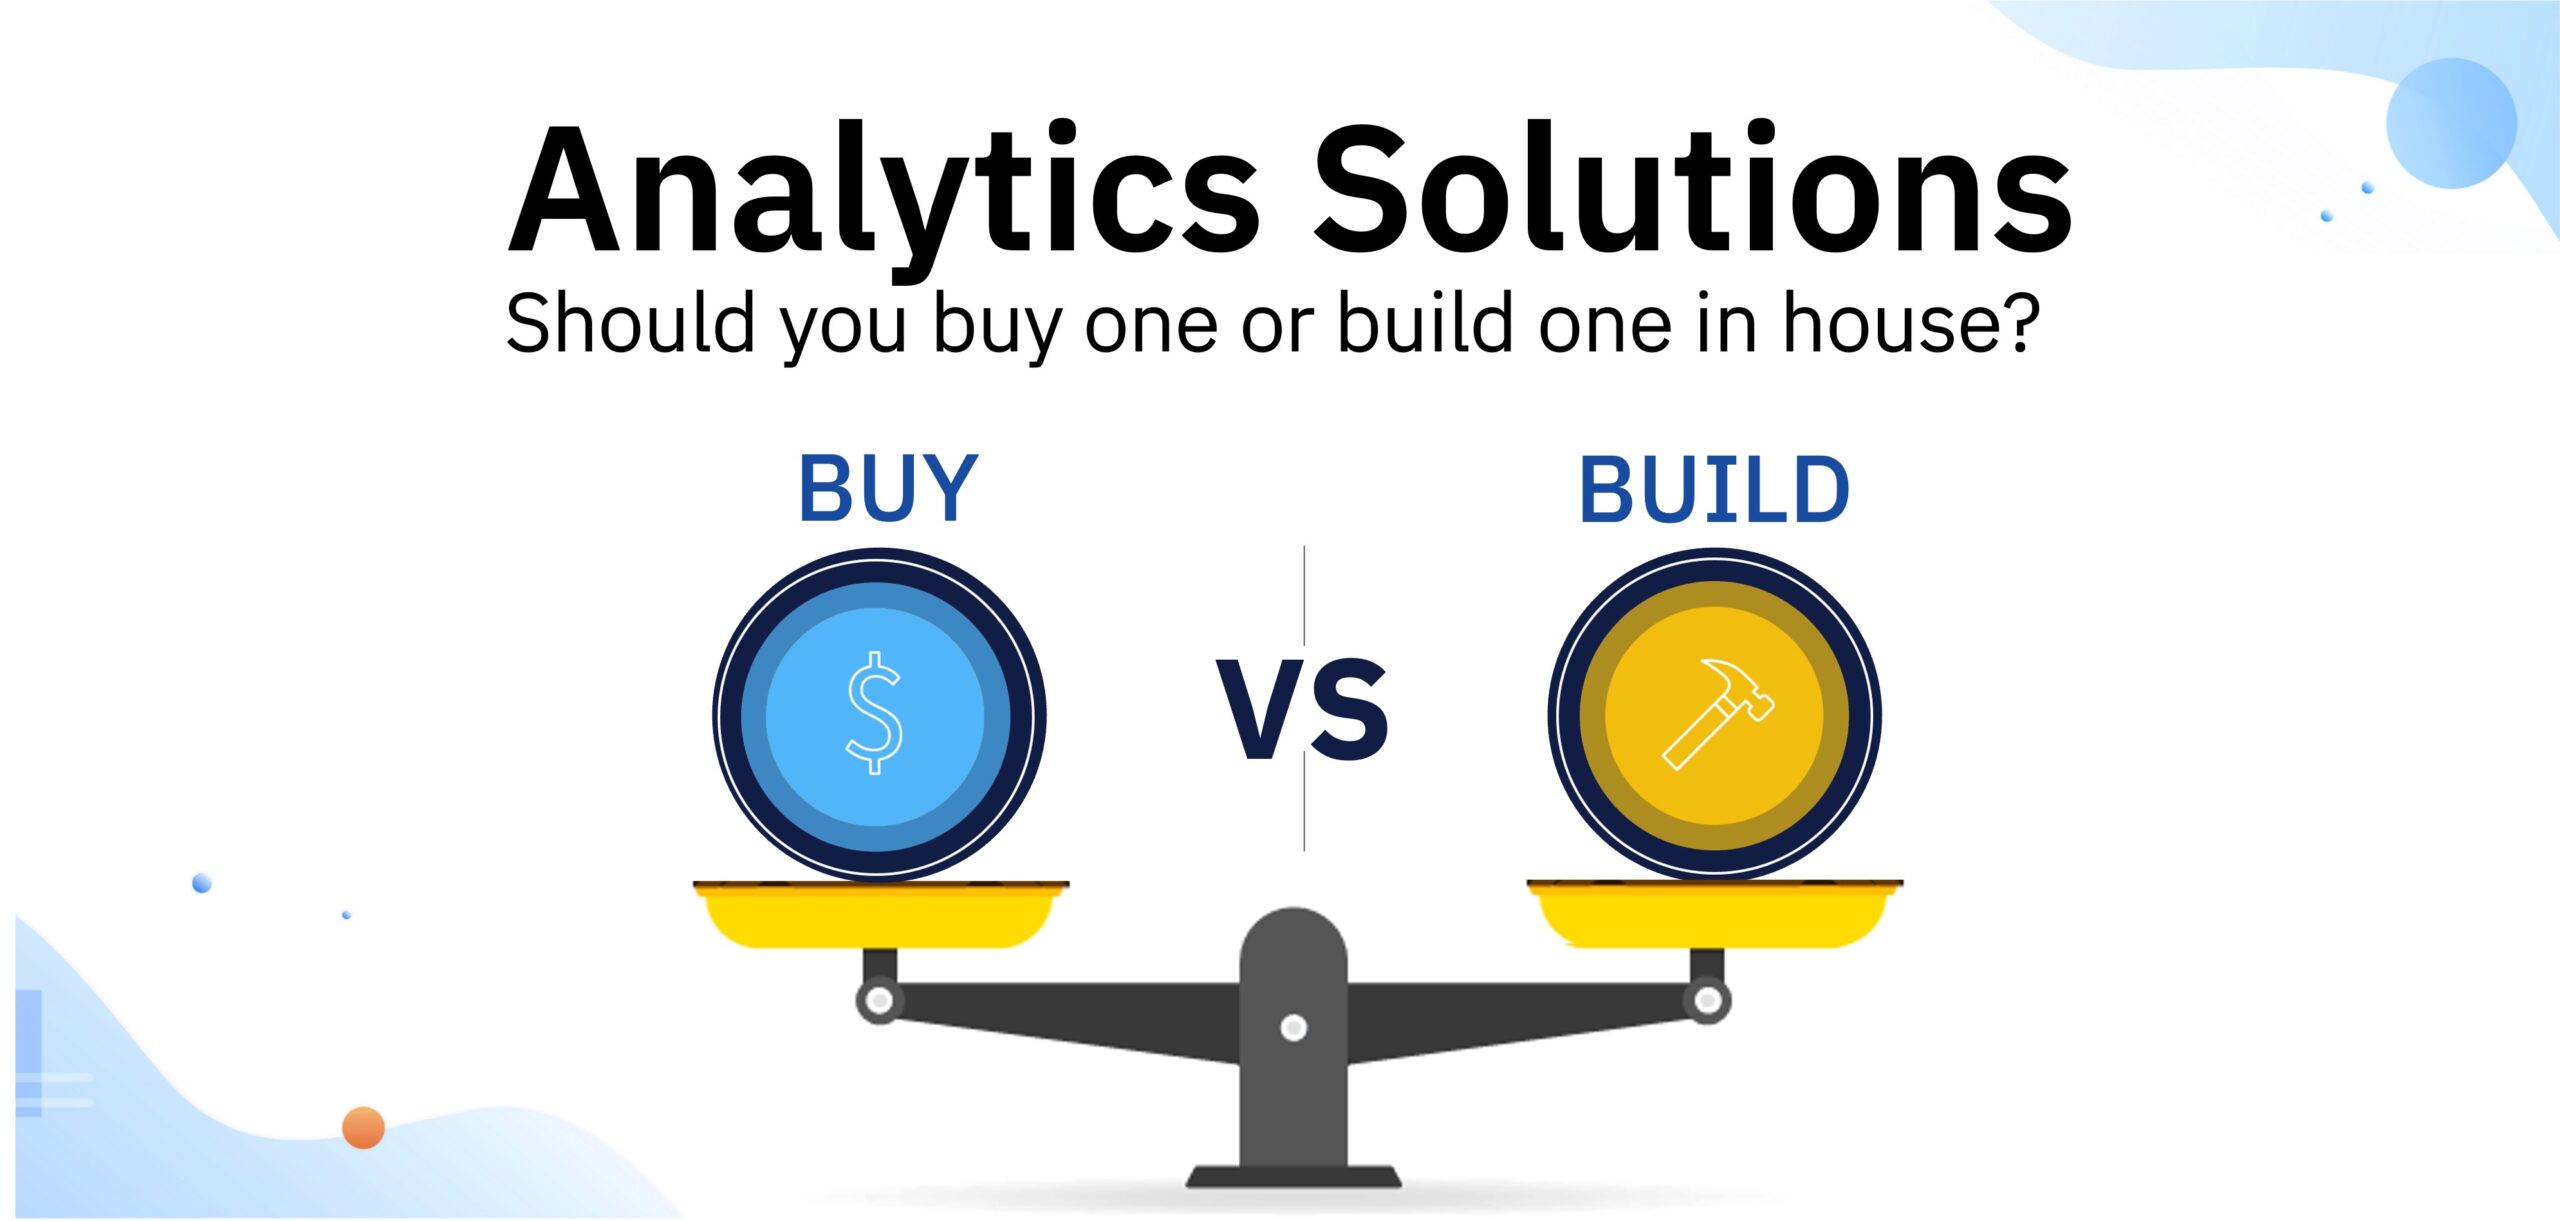 Analytics Solutions: Should You Buy One or Build one in house?